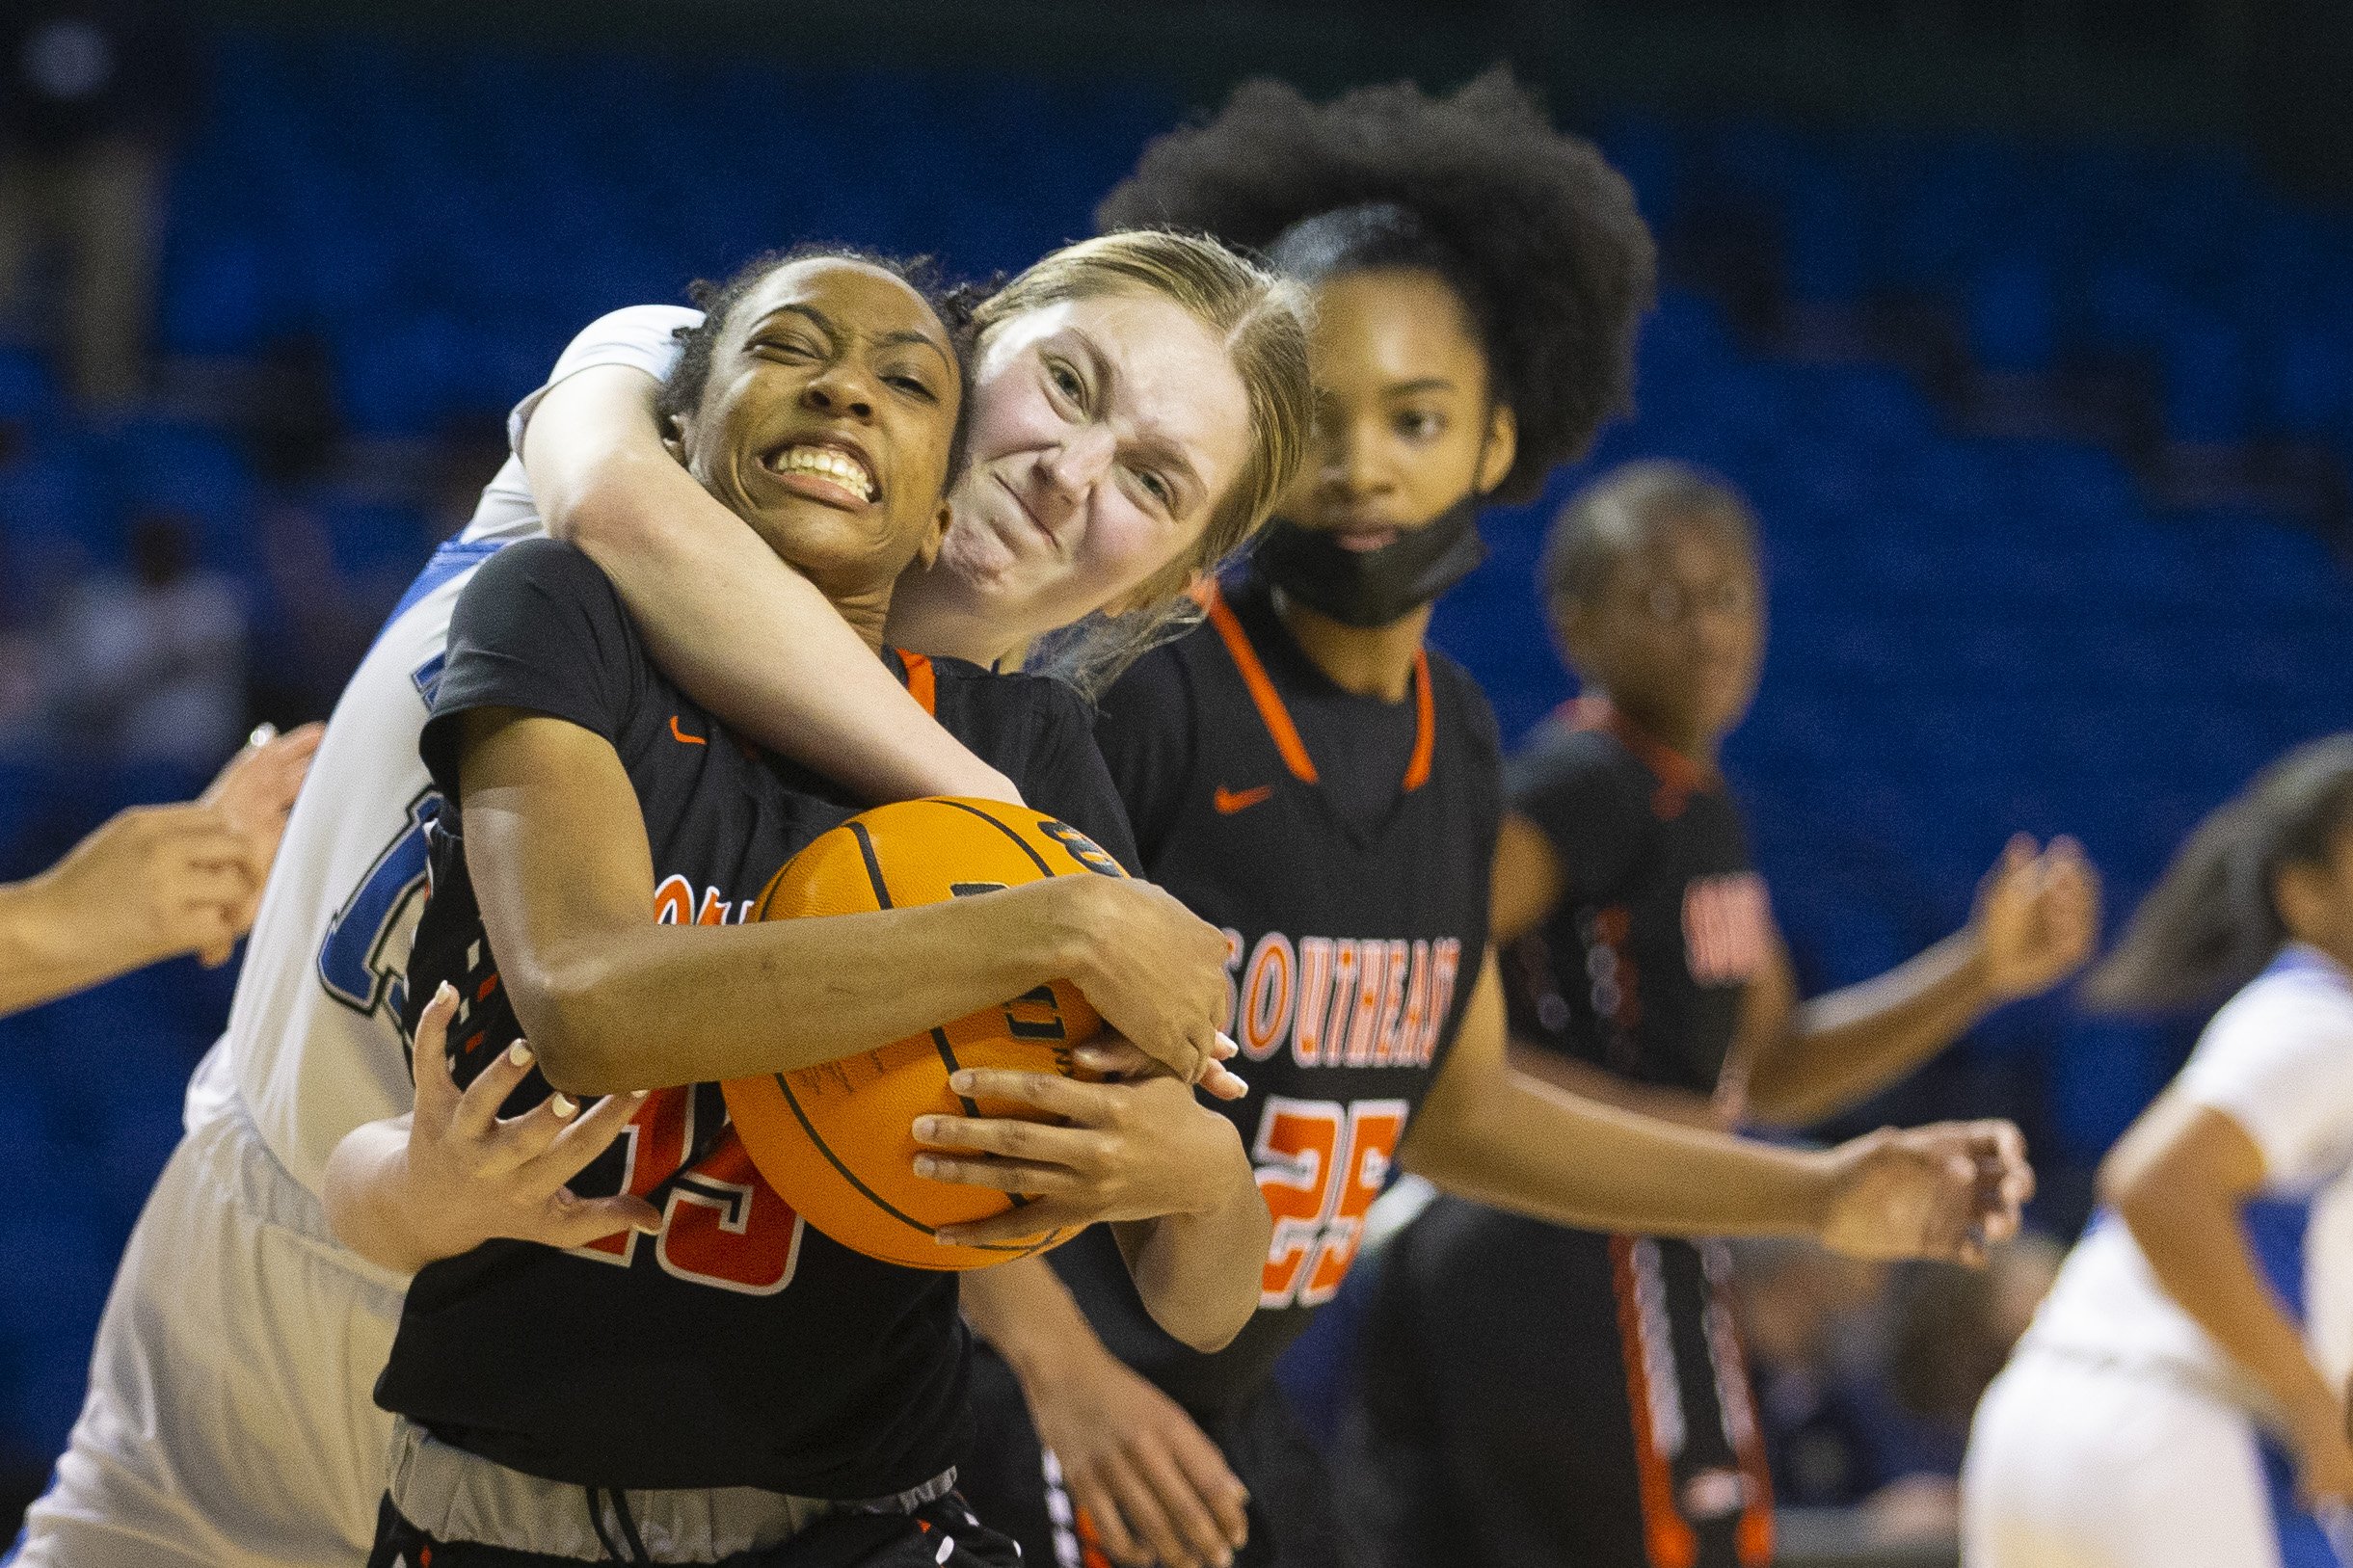  Ragsdale's Erin Mackie fouls Southeast's Kailey Gates while battling for the ball during the third quarter on the second day of the HAECOisHiring.com Invitational at the Greensboro Coliseum - Special Events Center in Greensboro, N.C., on Tuesday, De